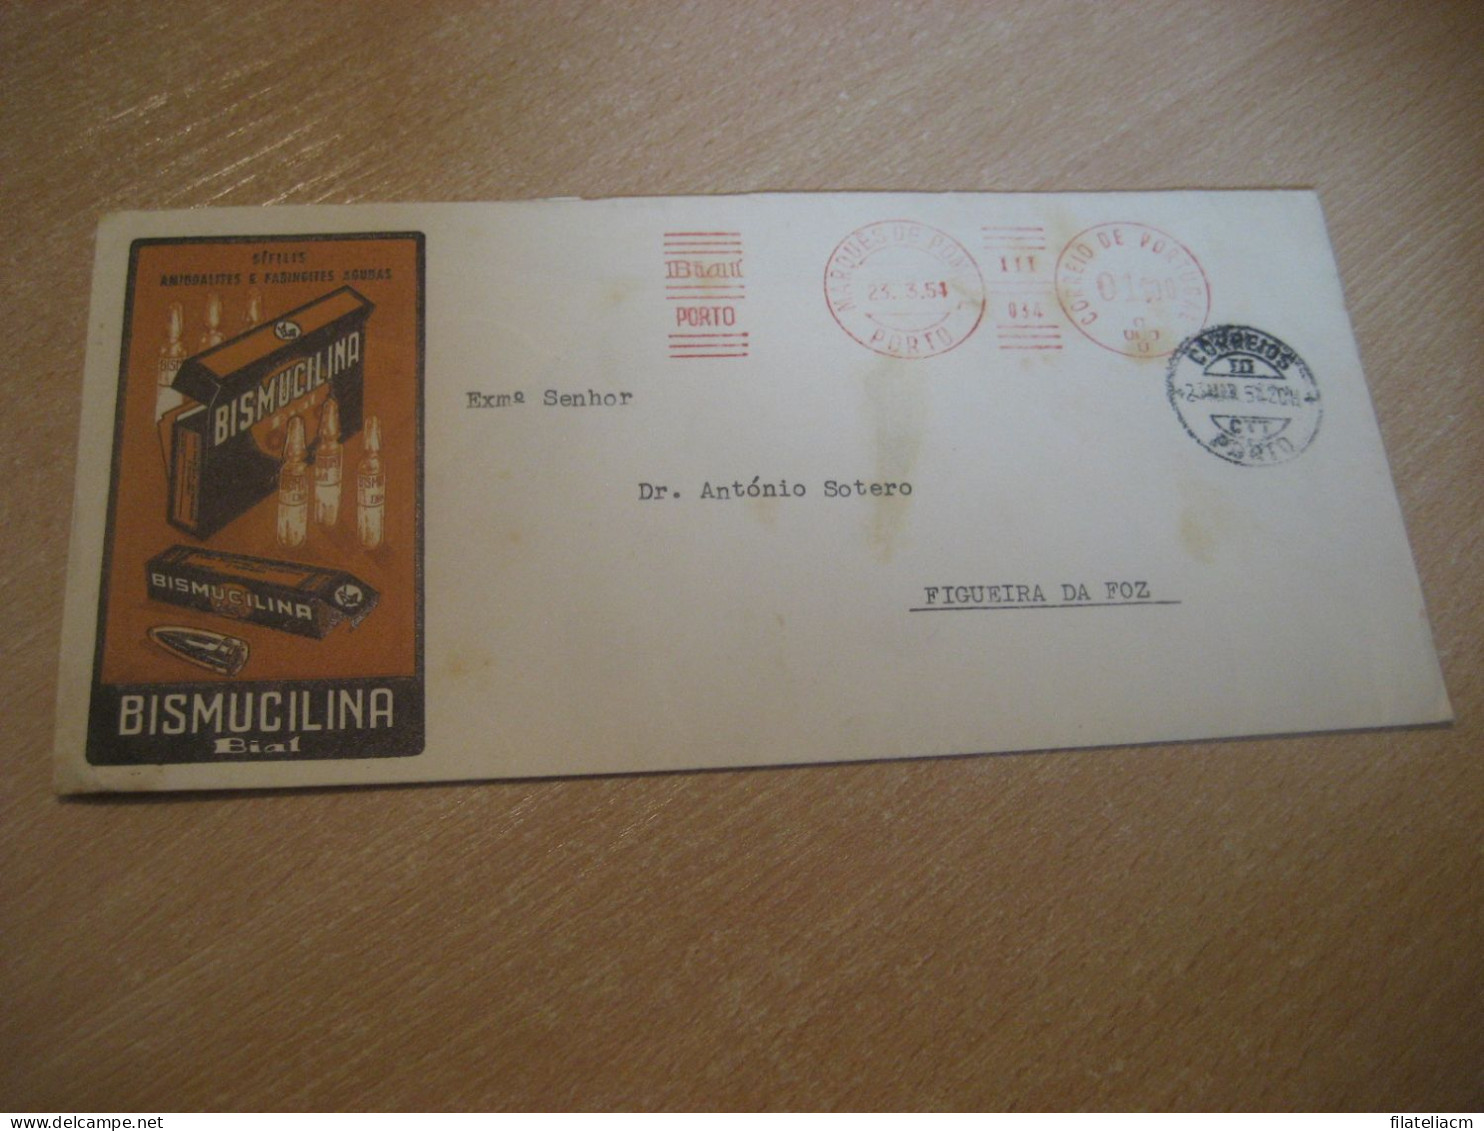 PORTO 1954 To Figueira Da Foz Bial Bismucilina Pharmacy Health Chemical Meter Mail Cancel Cover PORTUGAL - Covers & Documents